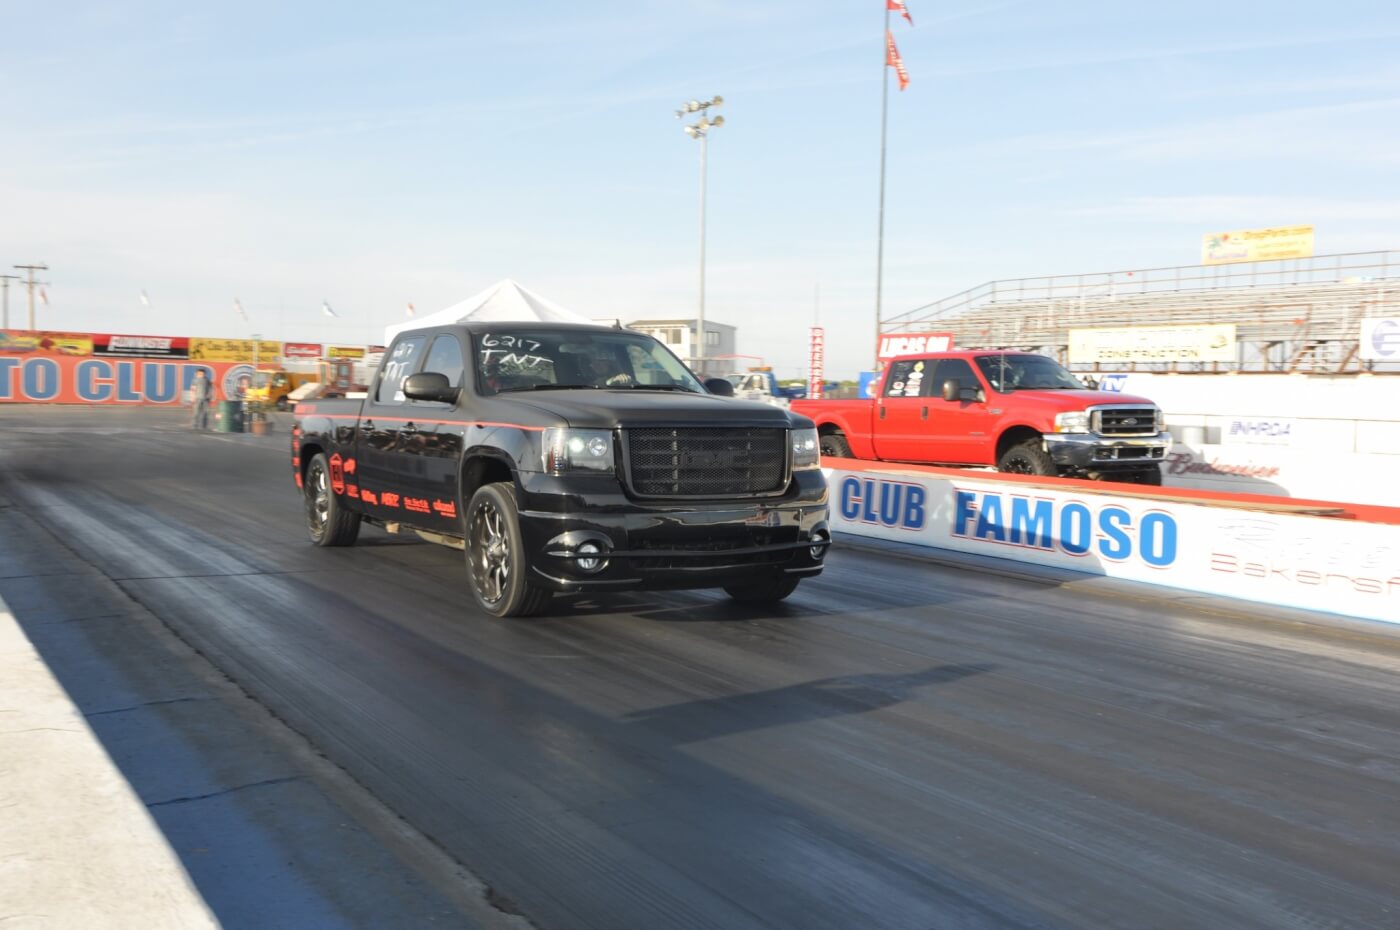 Mike of Dmax Store brought out his new toy, an LMM-powered GMC, to compete.